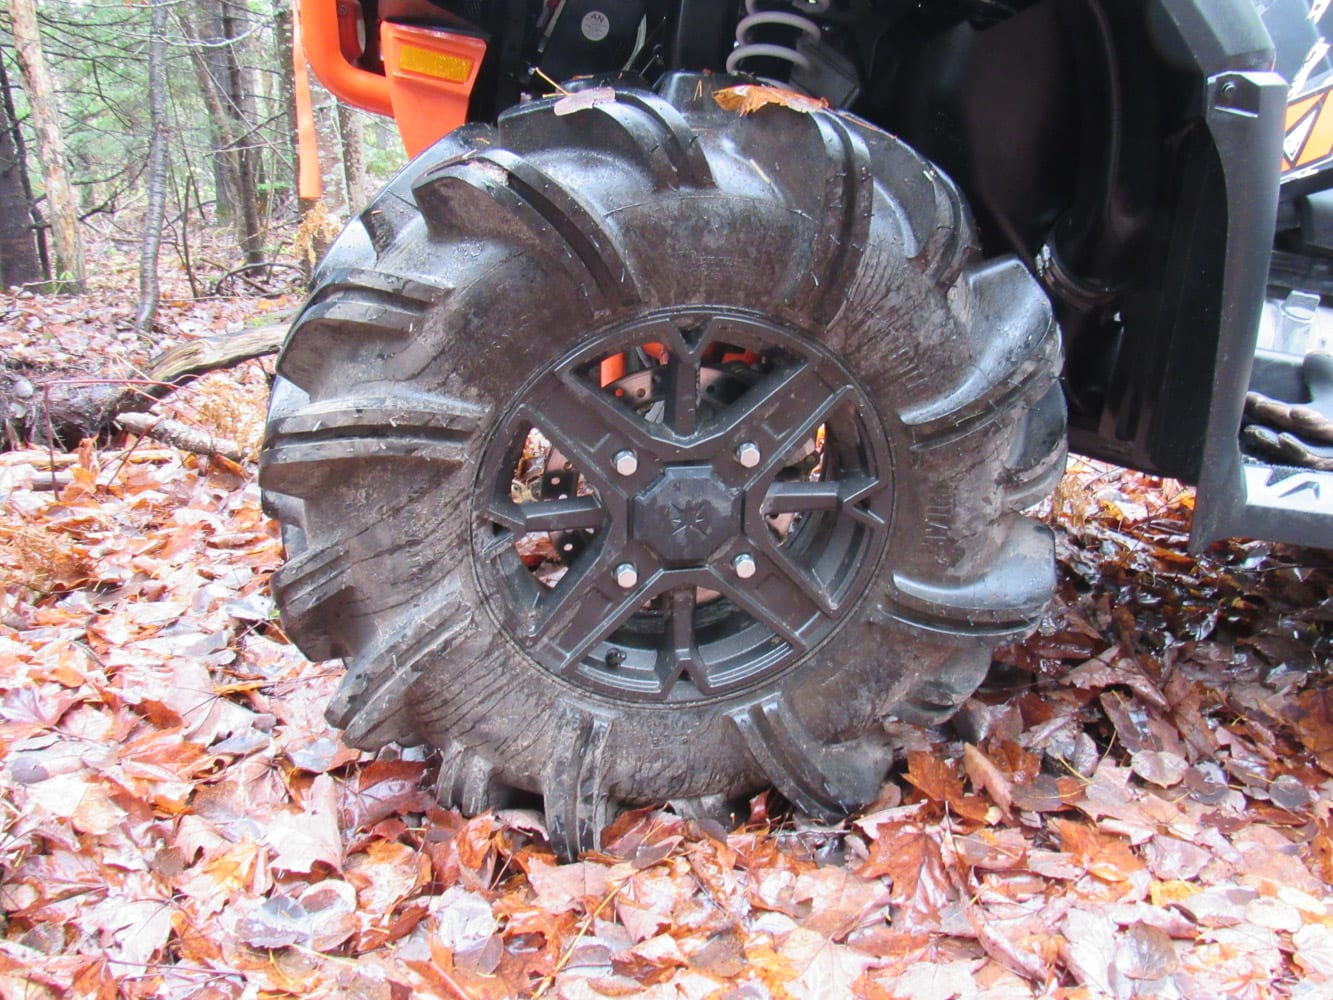 How to choose your UTV tires